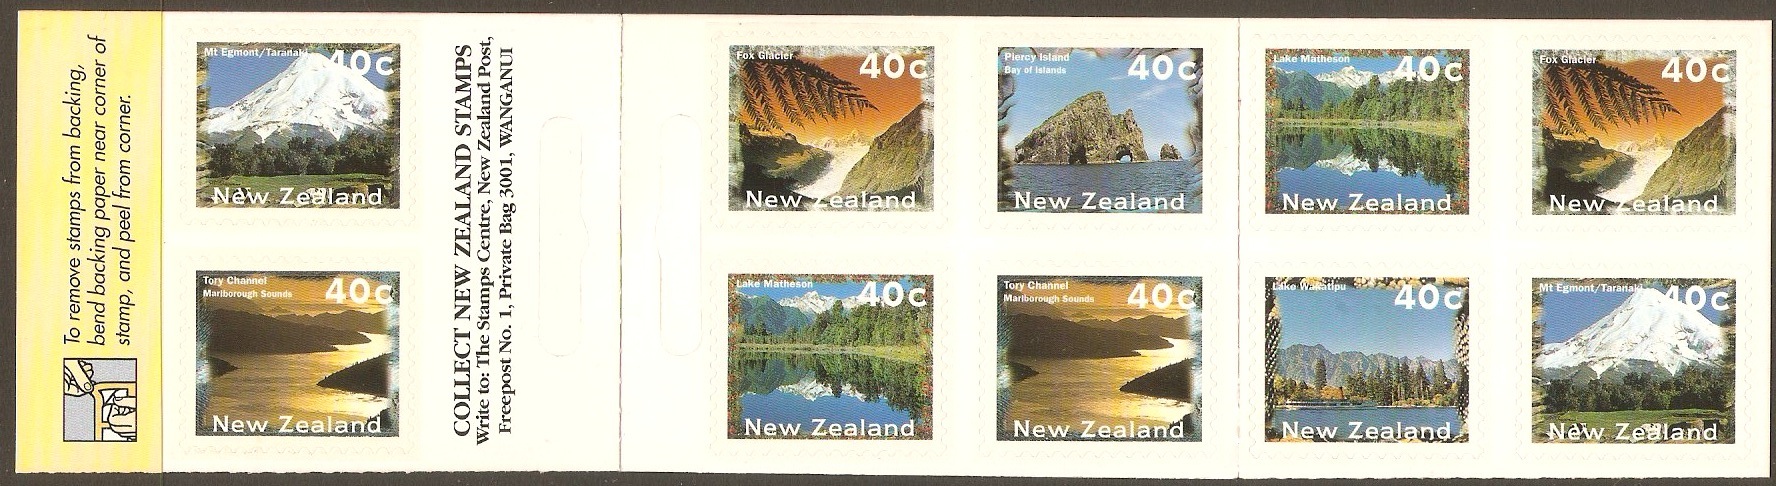 New Zealand 1996 Scenery Series Booklet. SG1984b-1987. - Click Image to Close